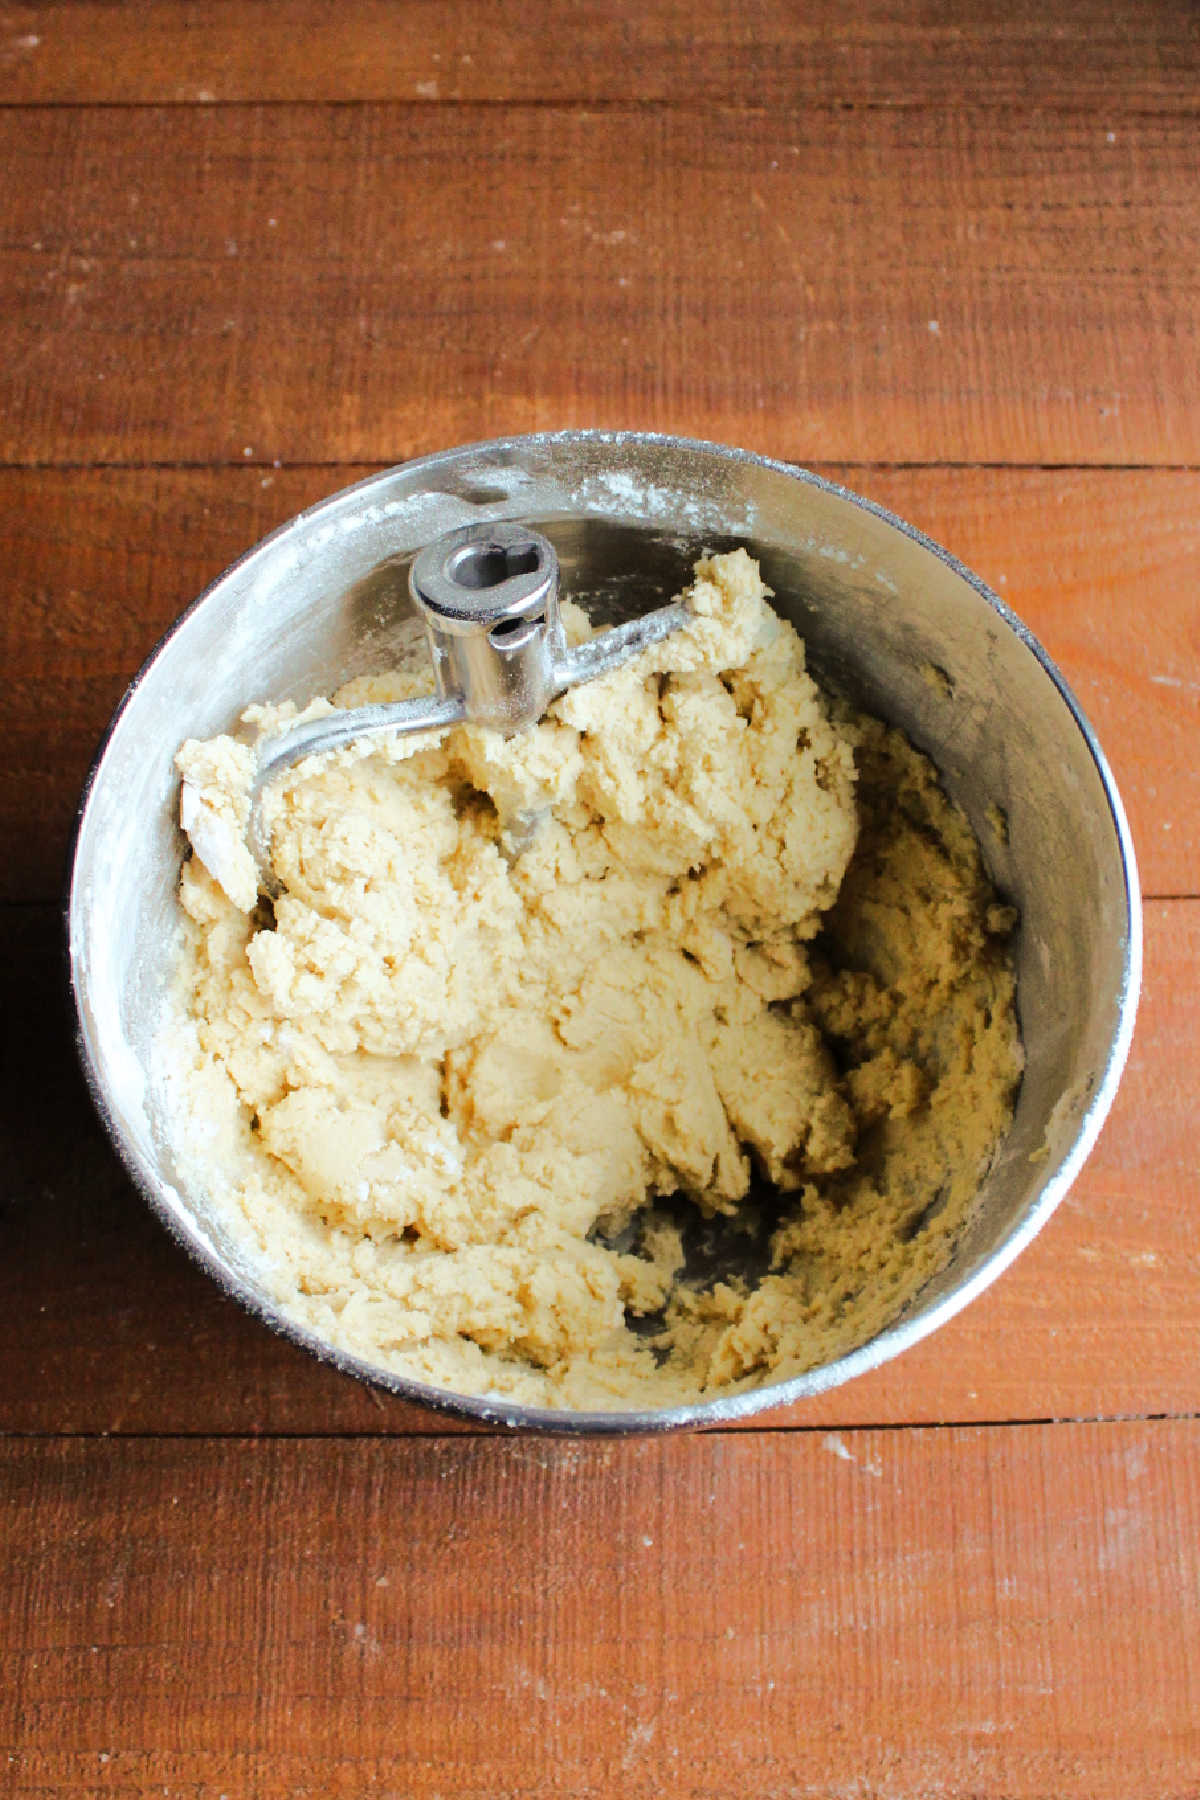 Mixer bowl filled with maple snickerdoodle dough.